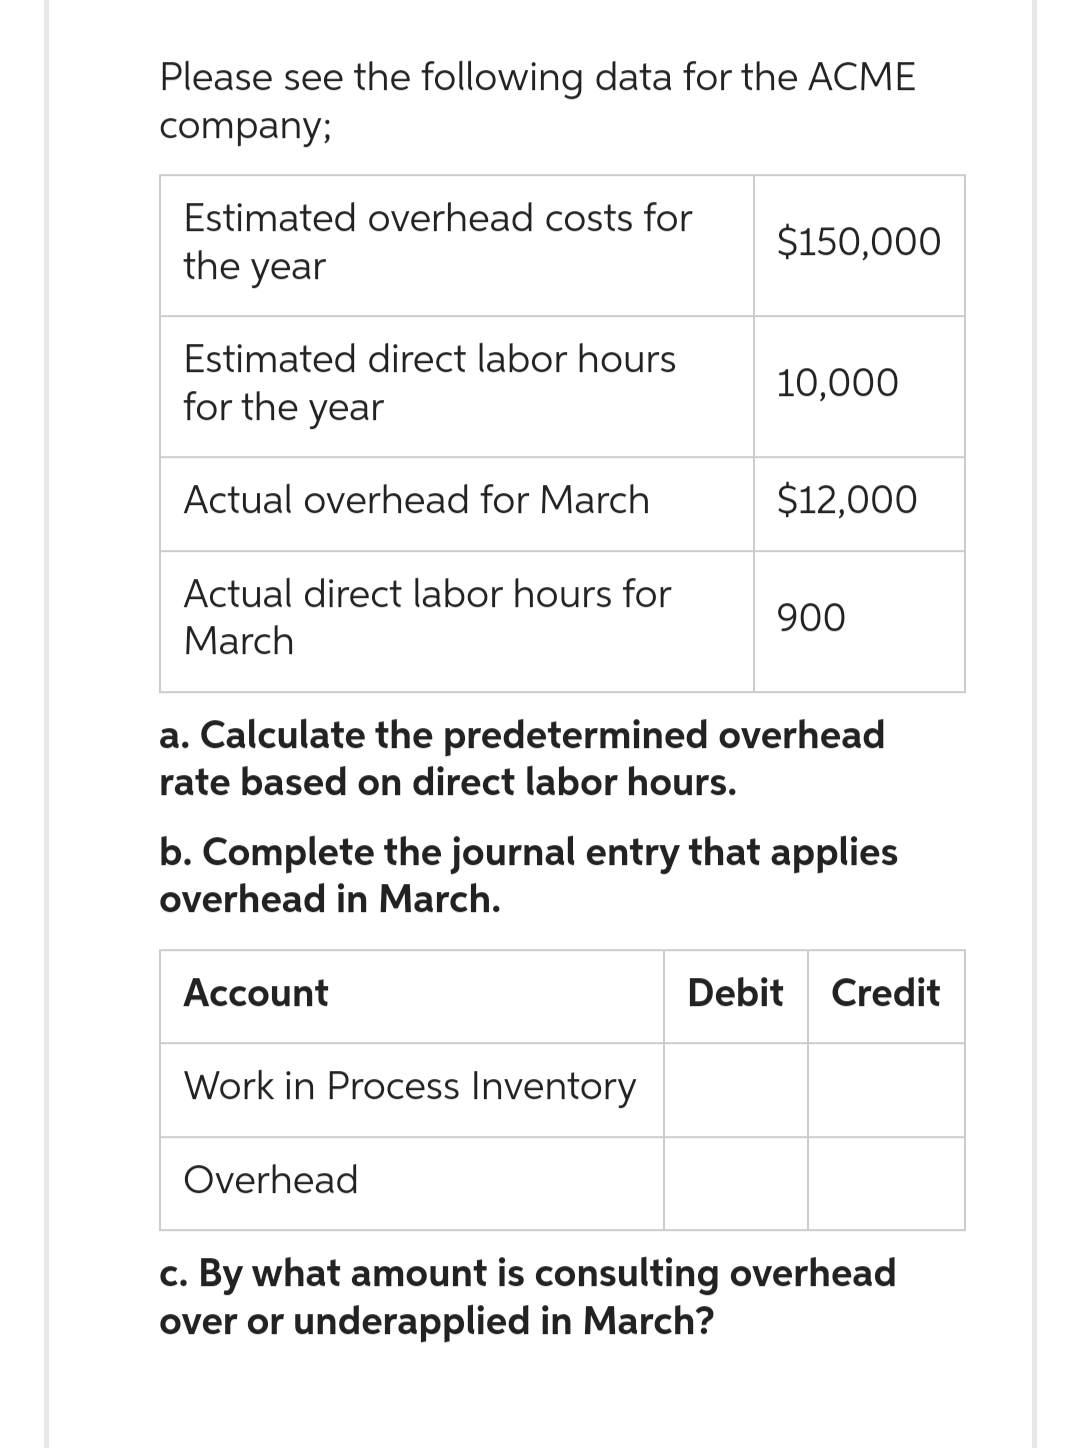 Please see the following data for the ACME
company;
Estimated overhead costs for
the year
Estimated direct labor hours
for the year
Actual overhead for March
Actual direct labor hours for
March
Account
$150,000
Work in Process Inventory
10,000
a. Calculate the predetermined overhead
rate based on direct labor hours.
Overhead
$12,000
b. Complete the journal entry that applies
overhead in March.
900
Debit Credit
c. By what amount is consulting overhead
over or underapplied in March?